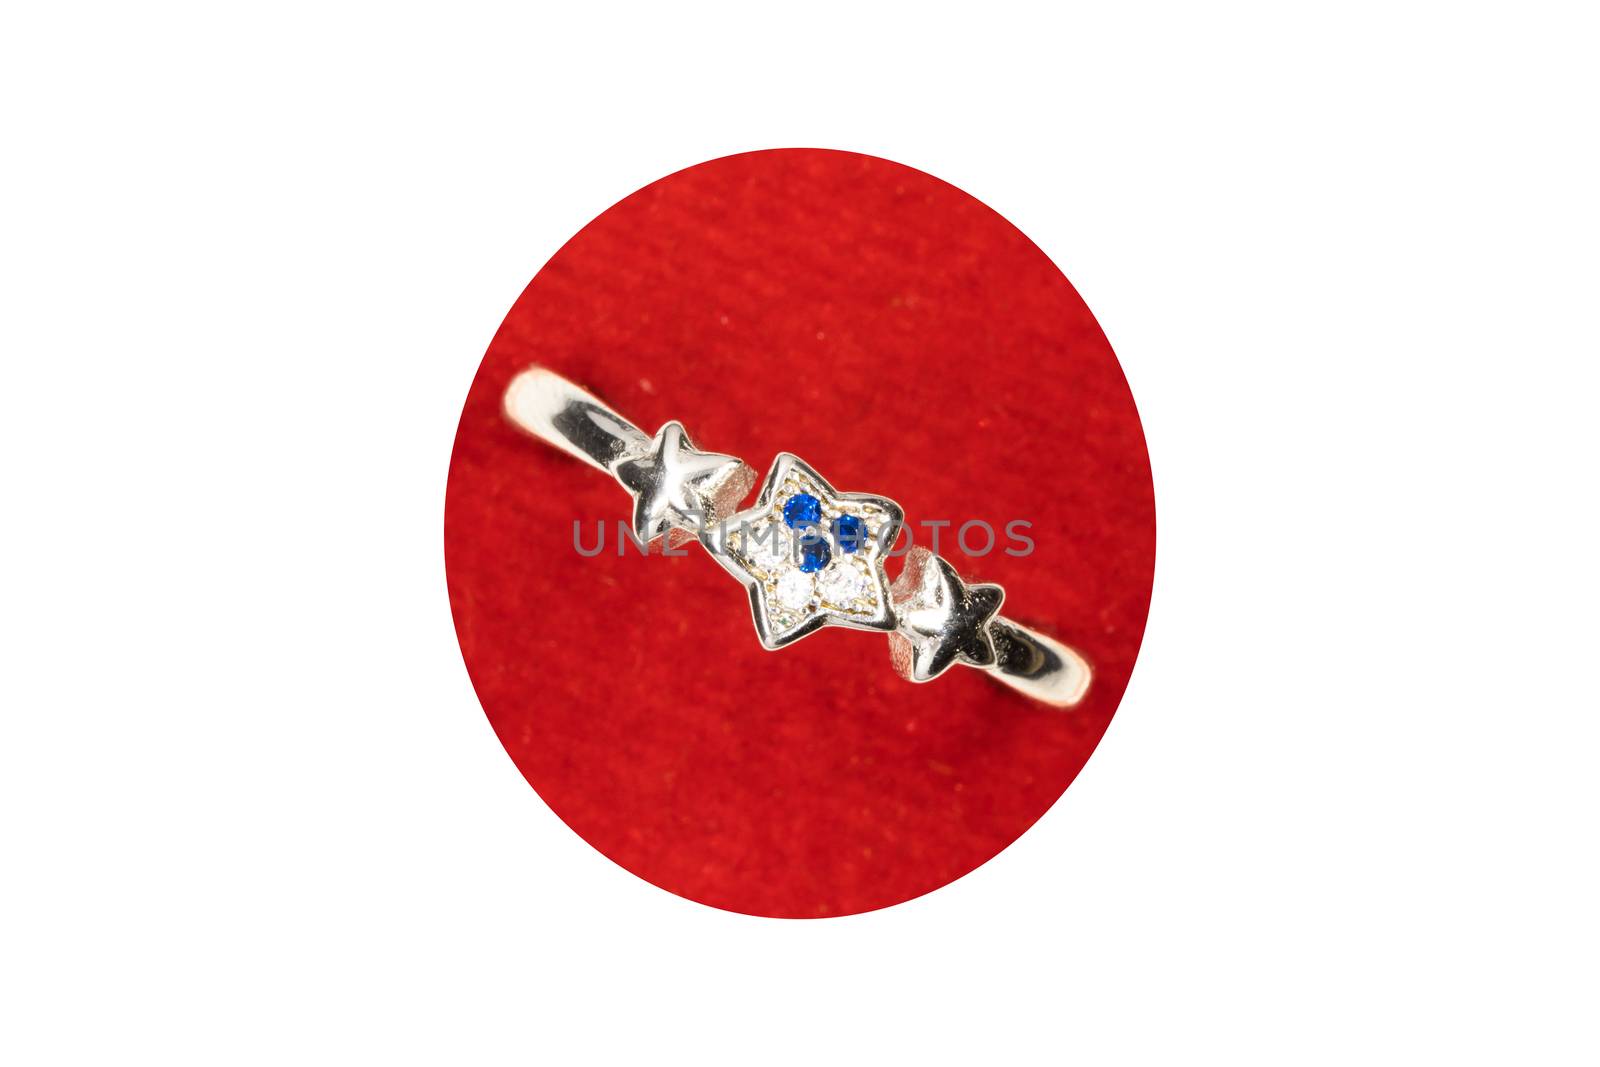 Ring design,three stars with 3 blue and white stones crystal designer ring Valentine Gift for girls and women